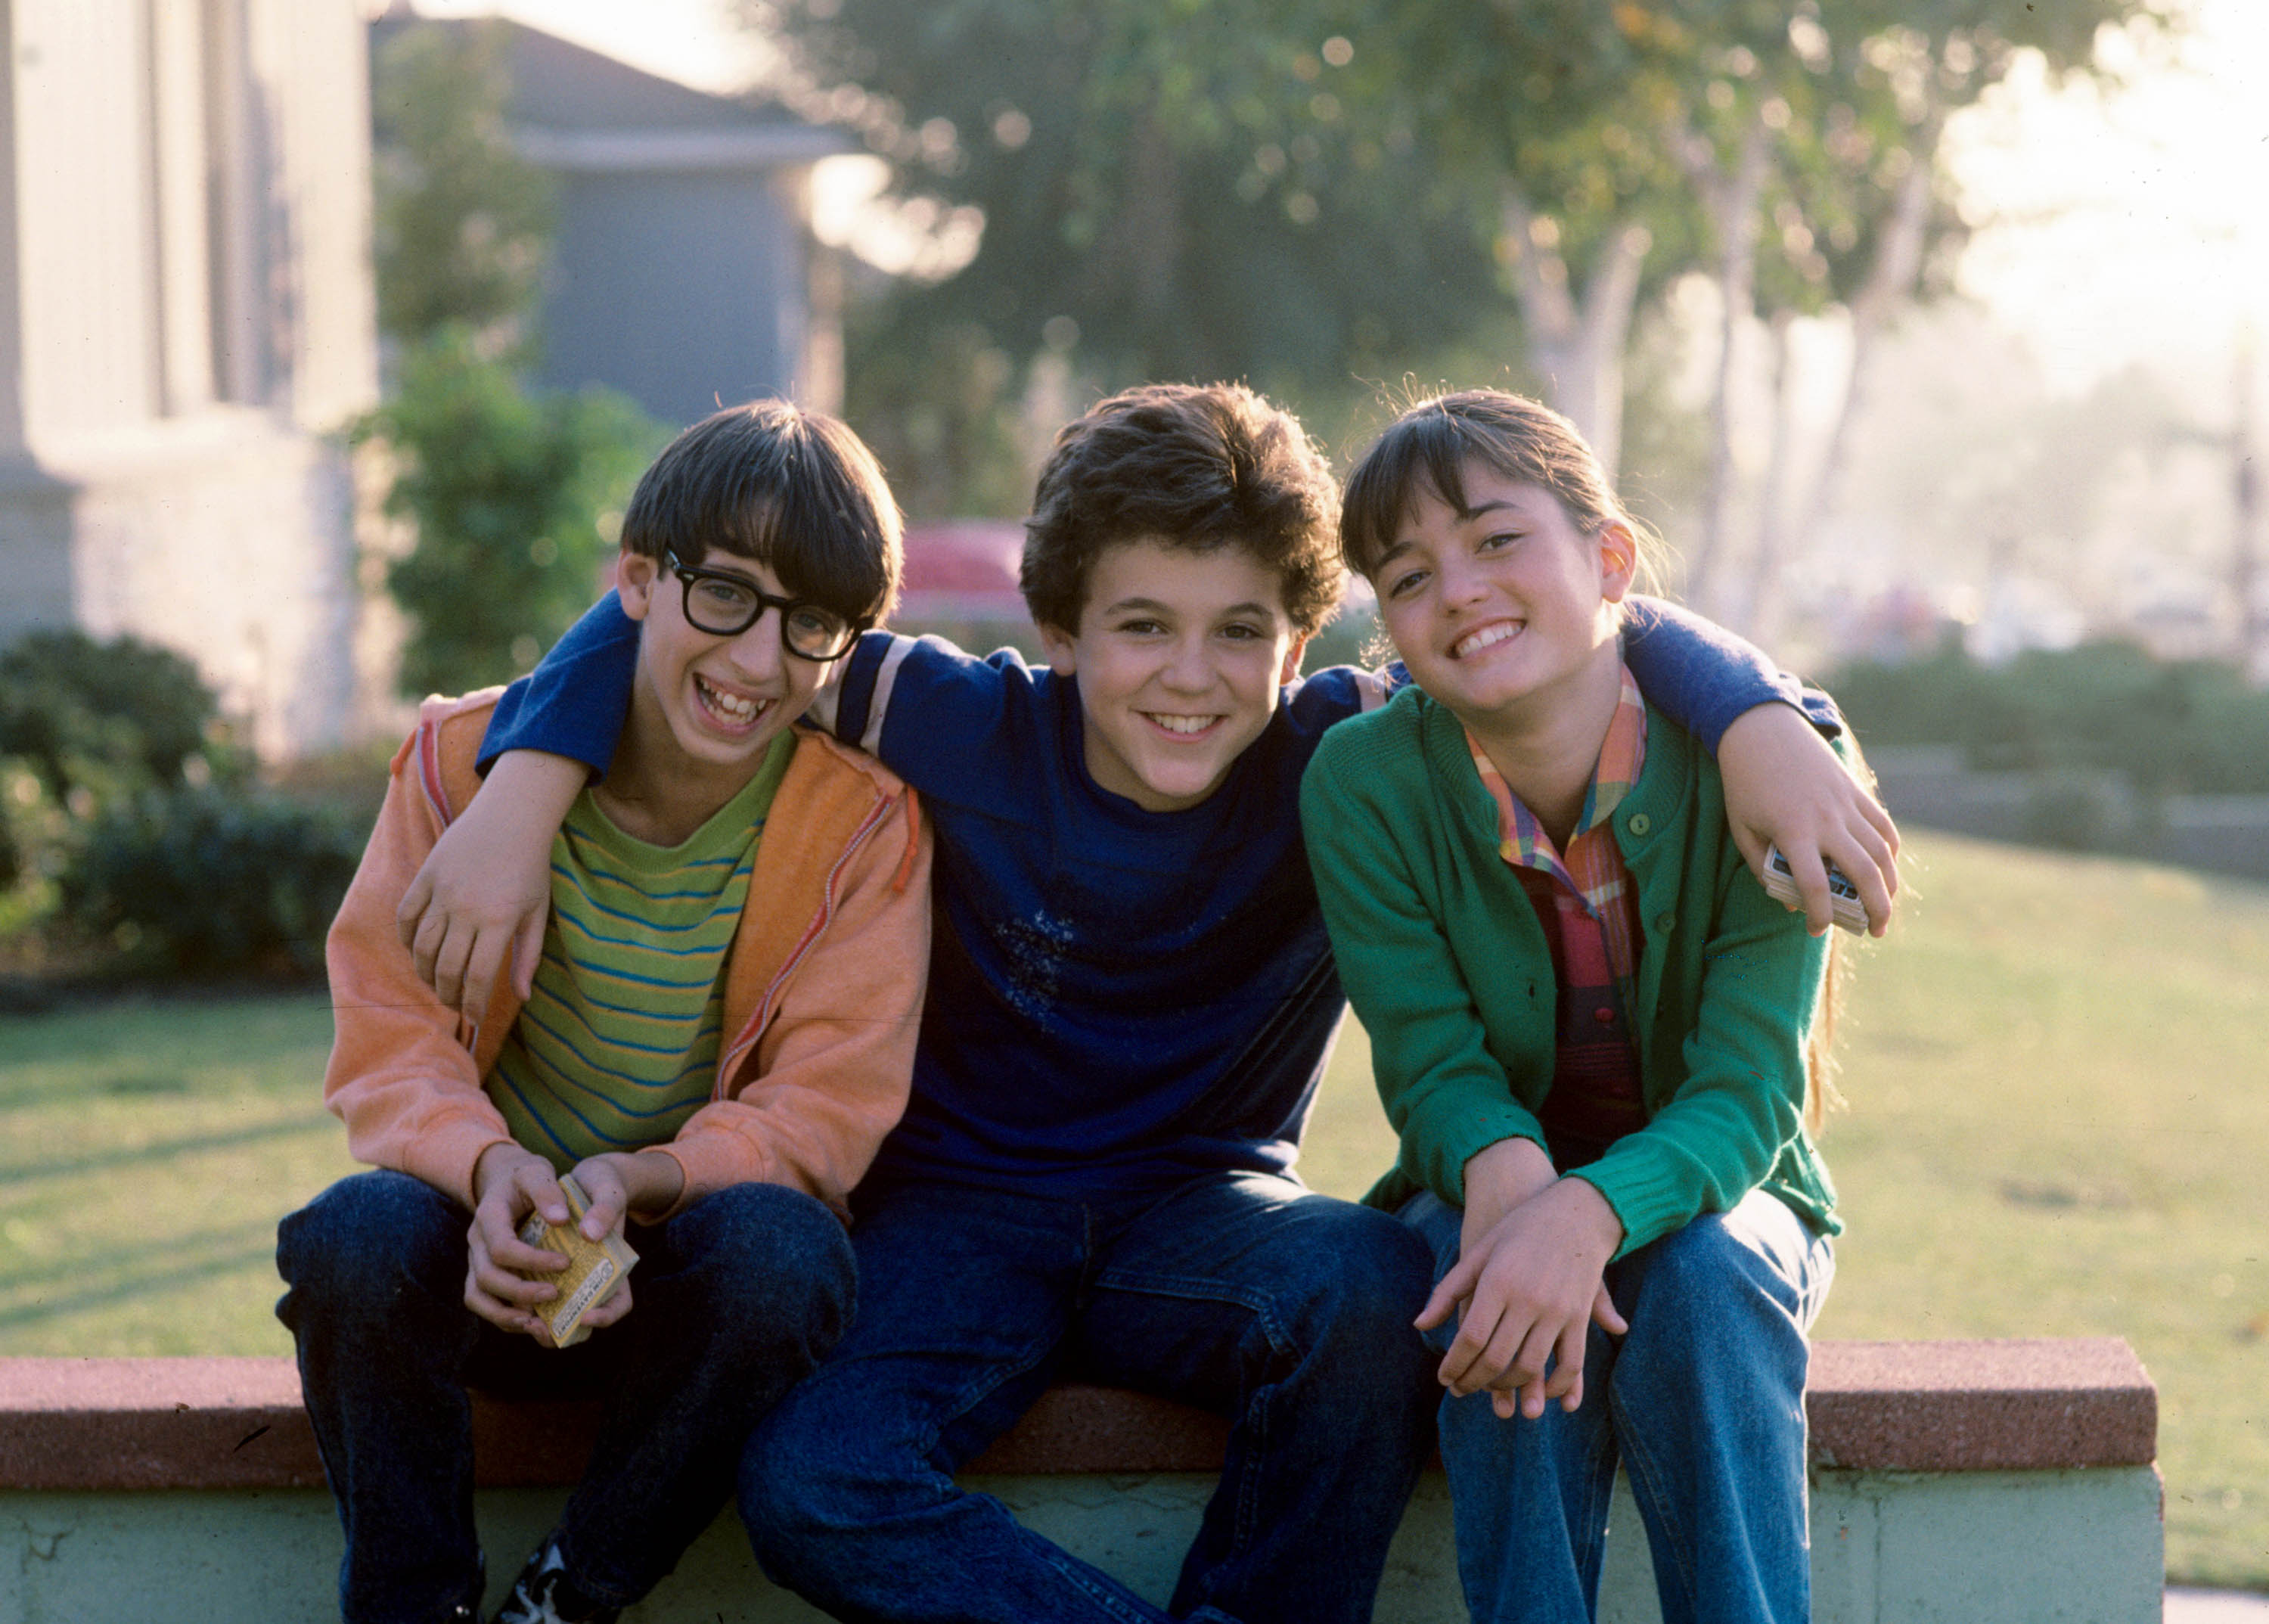 The Wonder Years Reboot Ordered at ABC Den of Geek